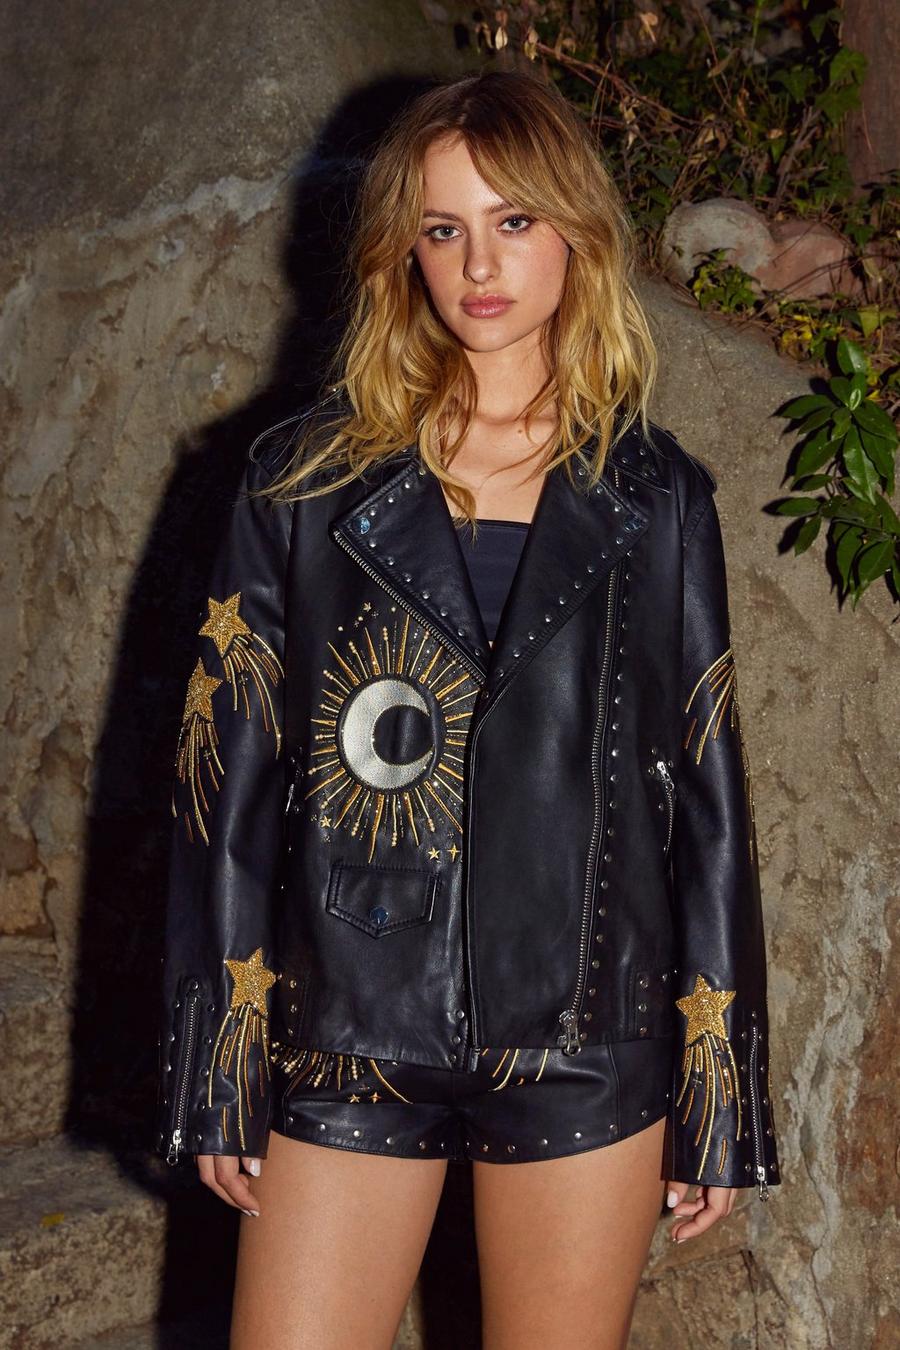 Leather Statement Embroidery Moto Jacket